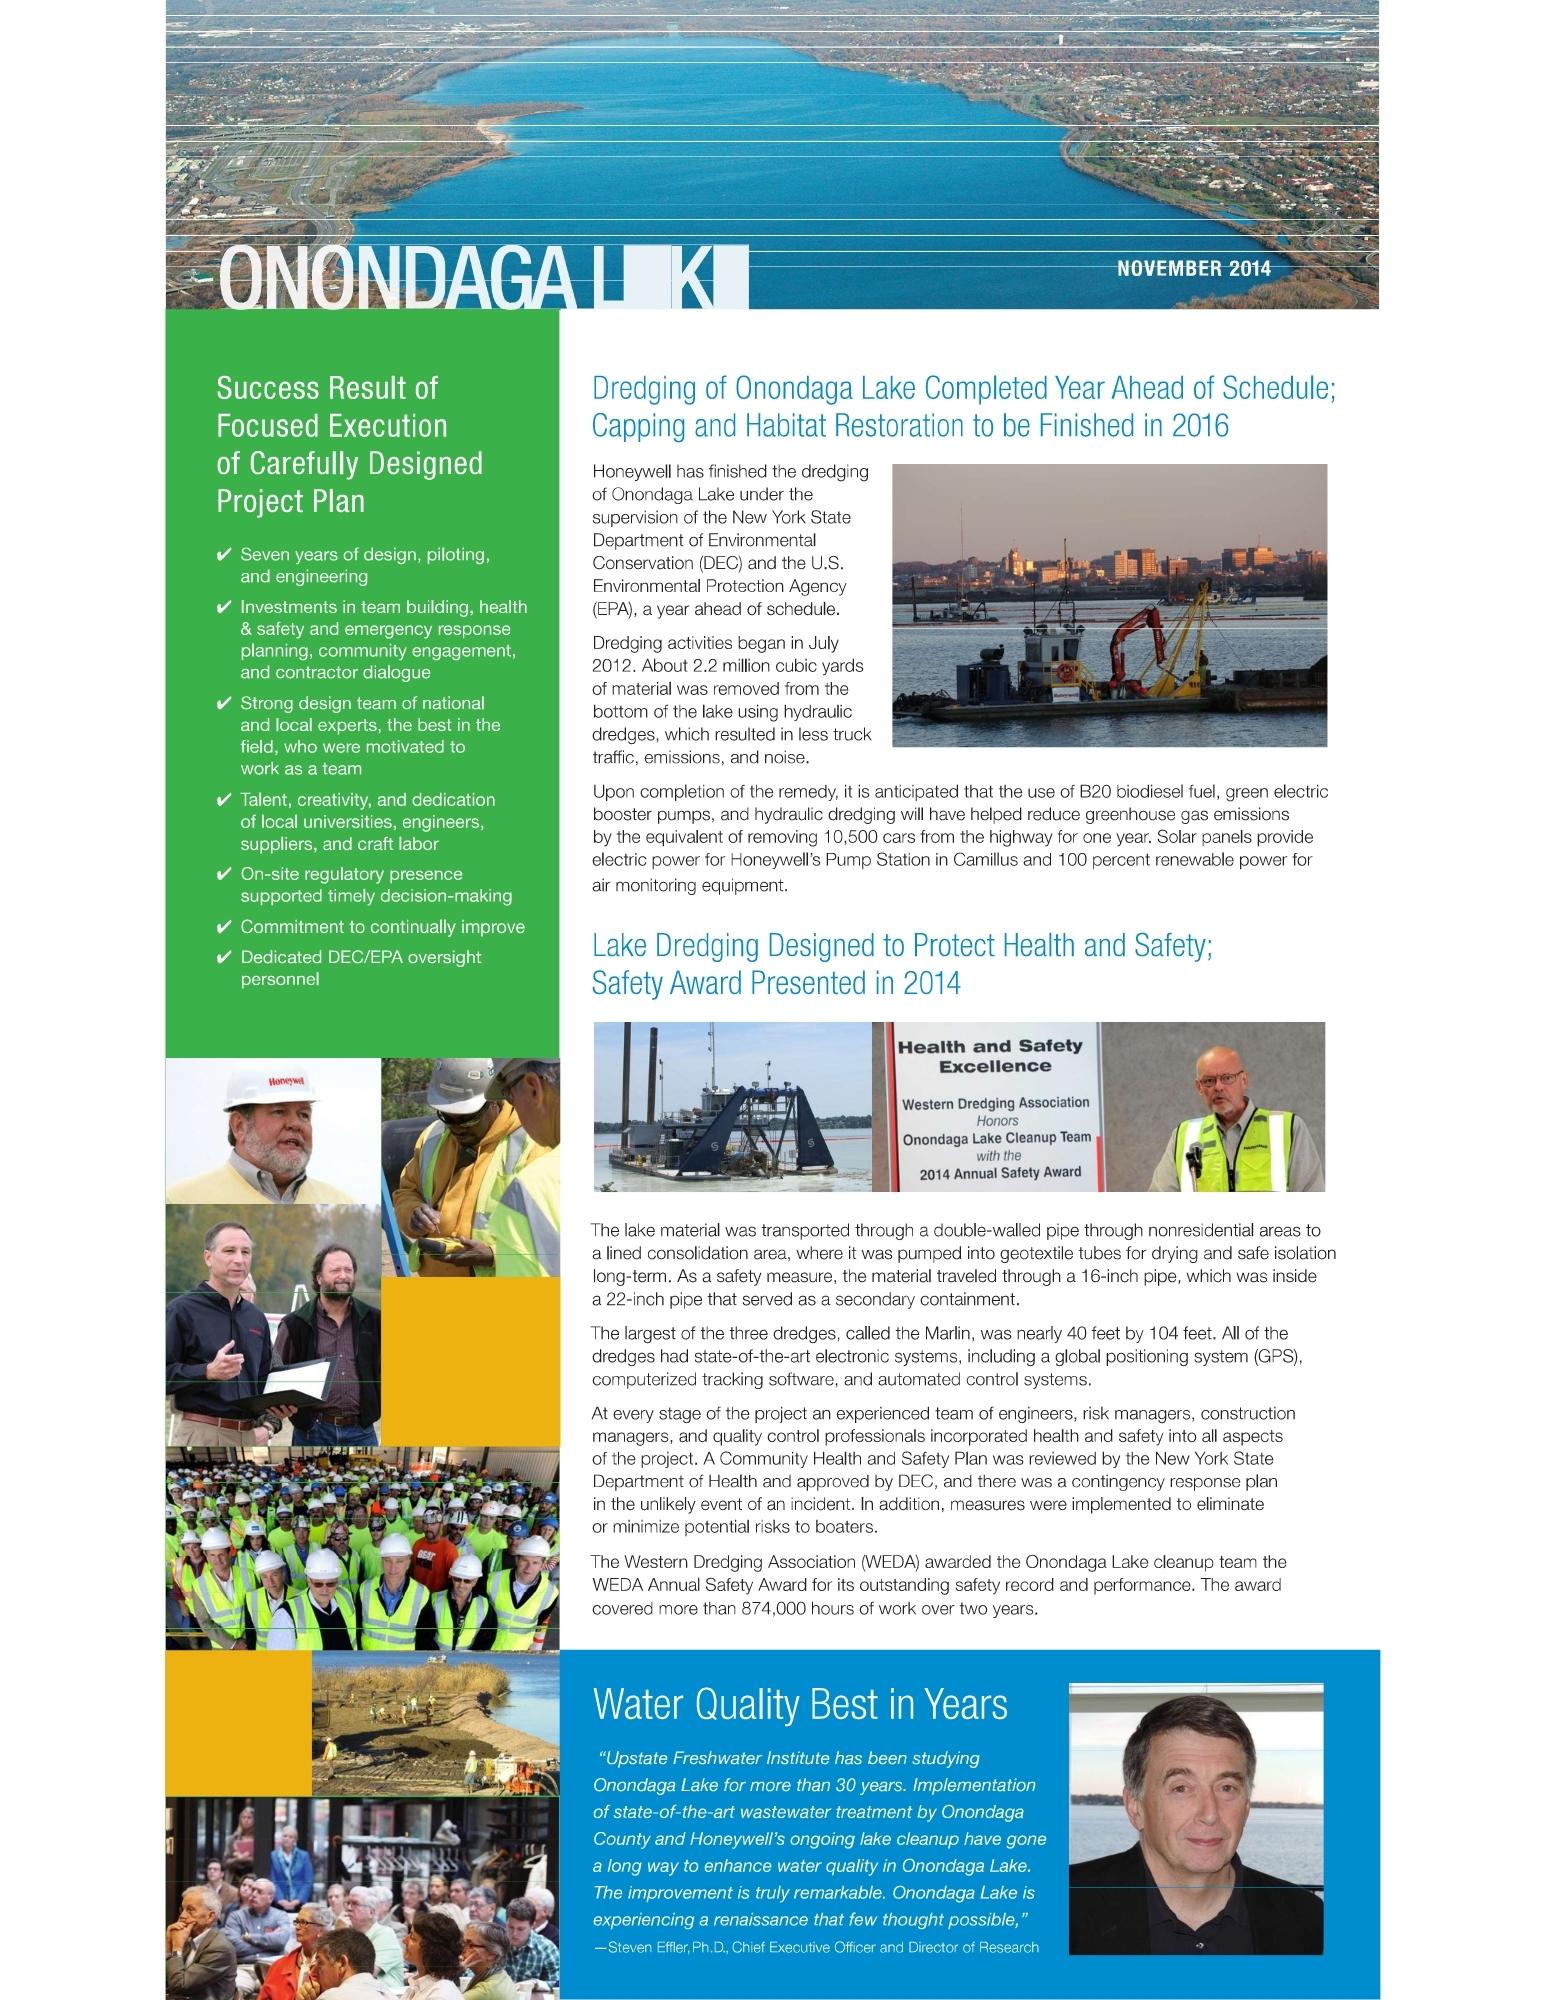 infographic with details about Lake Onondaga cleanup